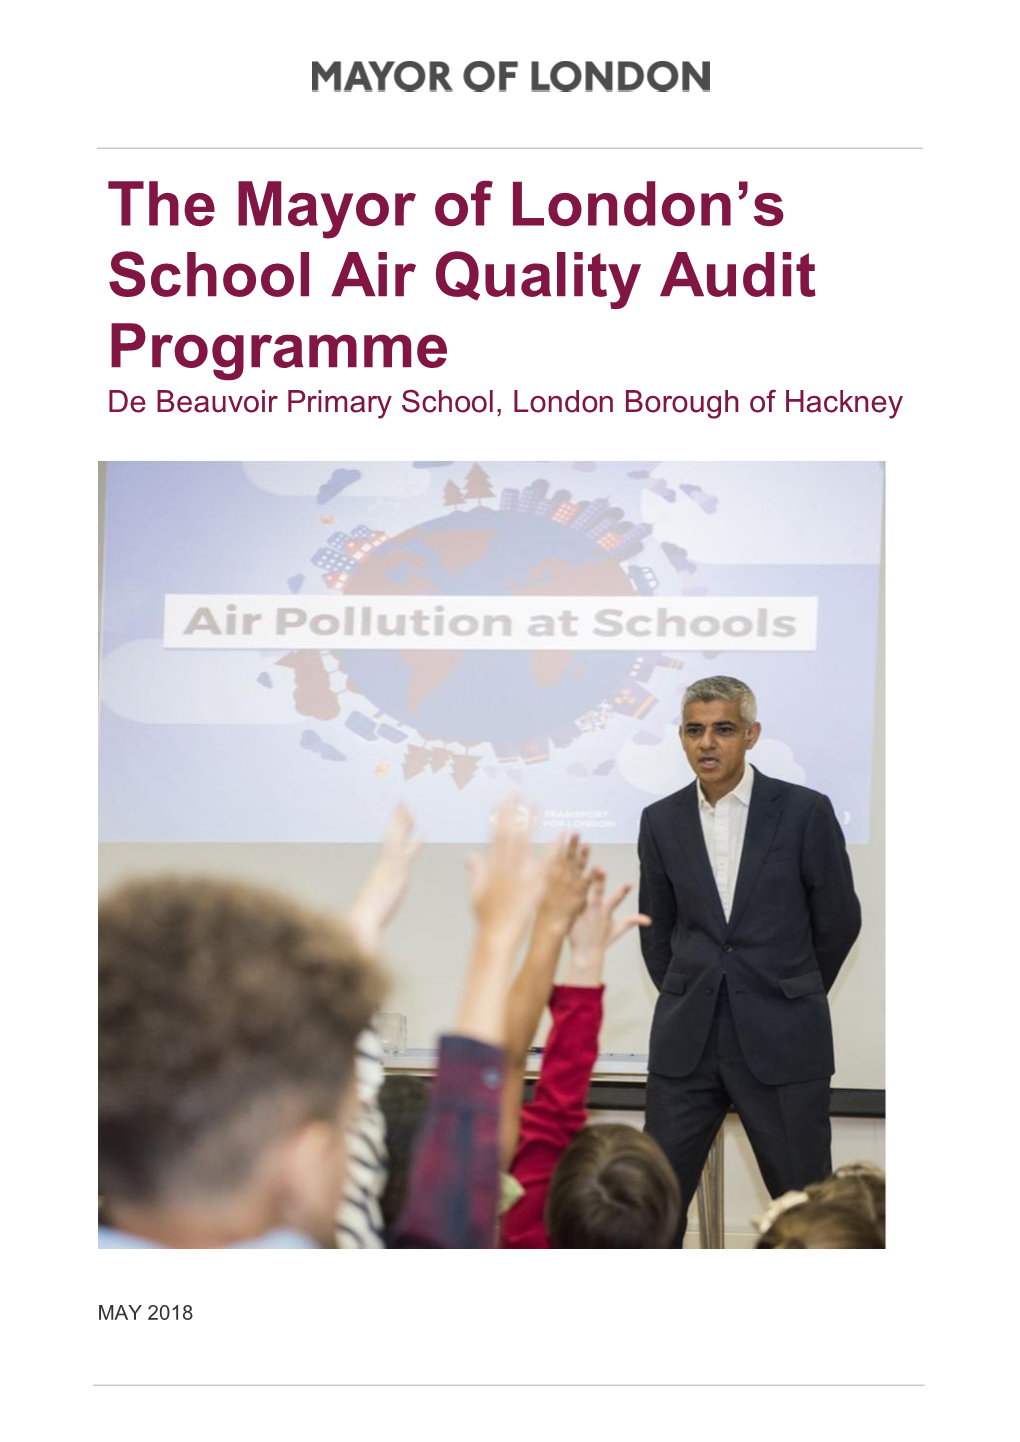 The Mayor of London's School Air Quality Audit Programme